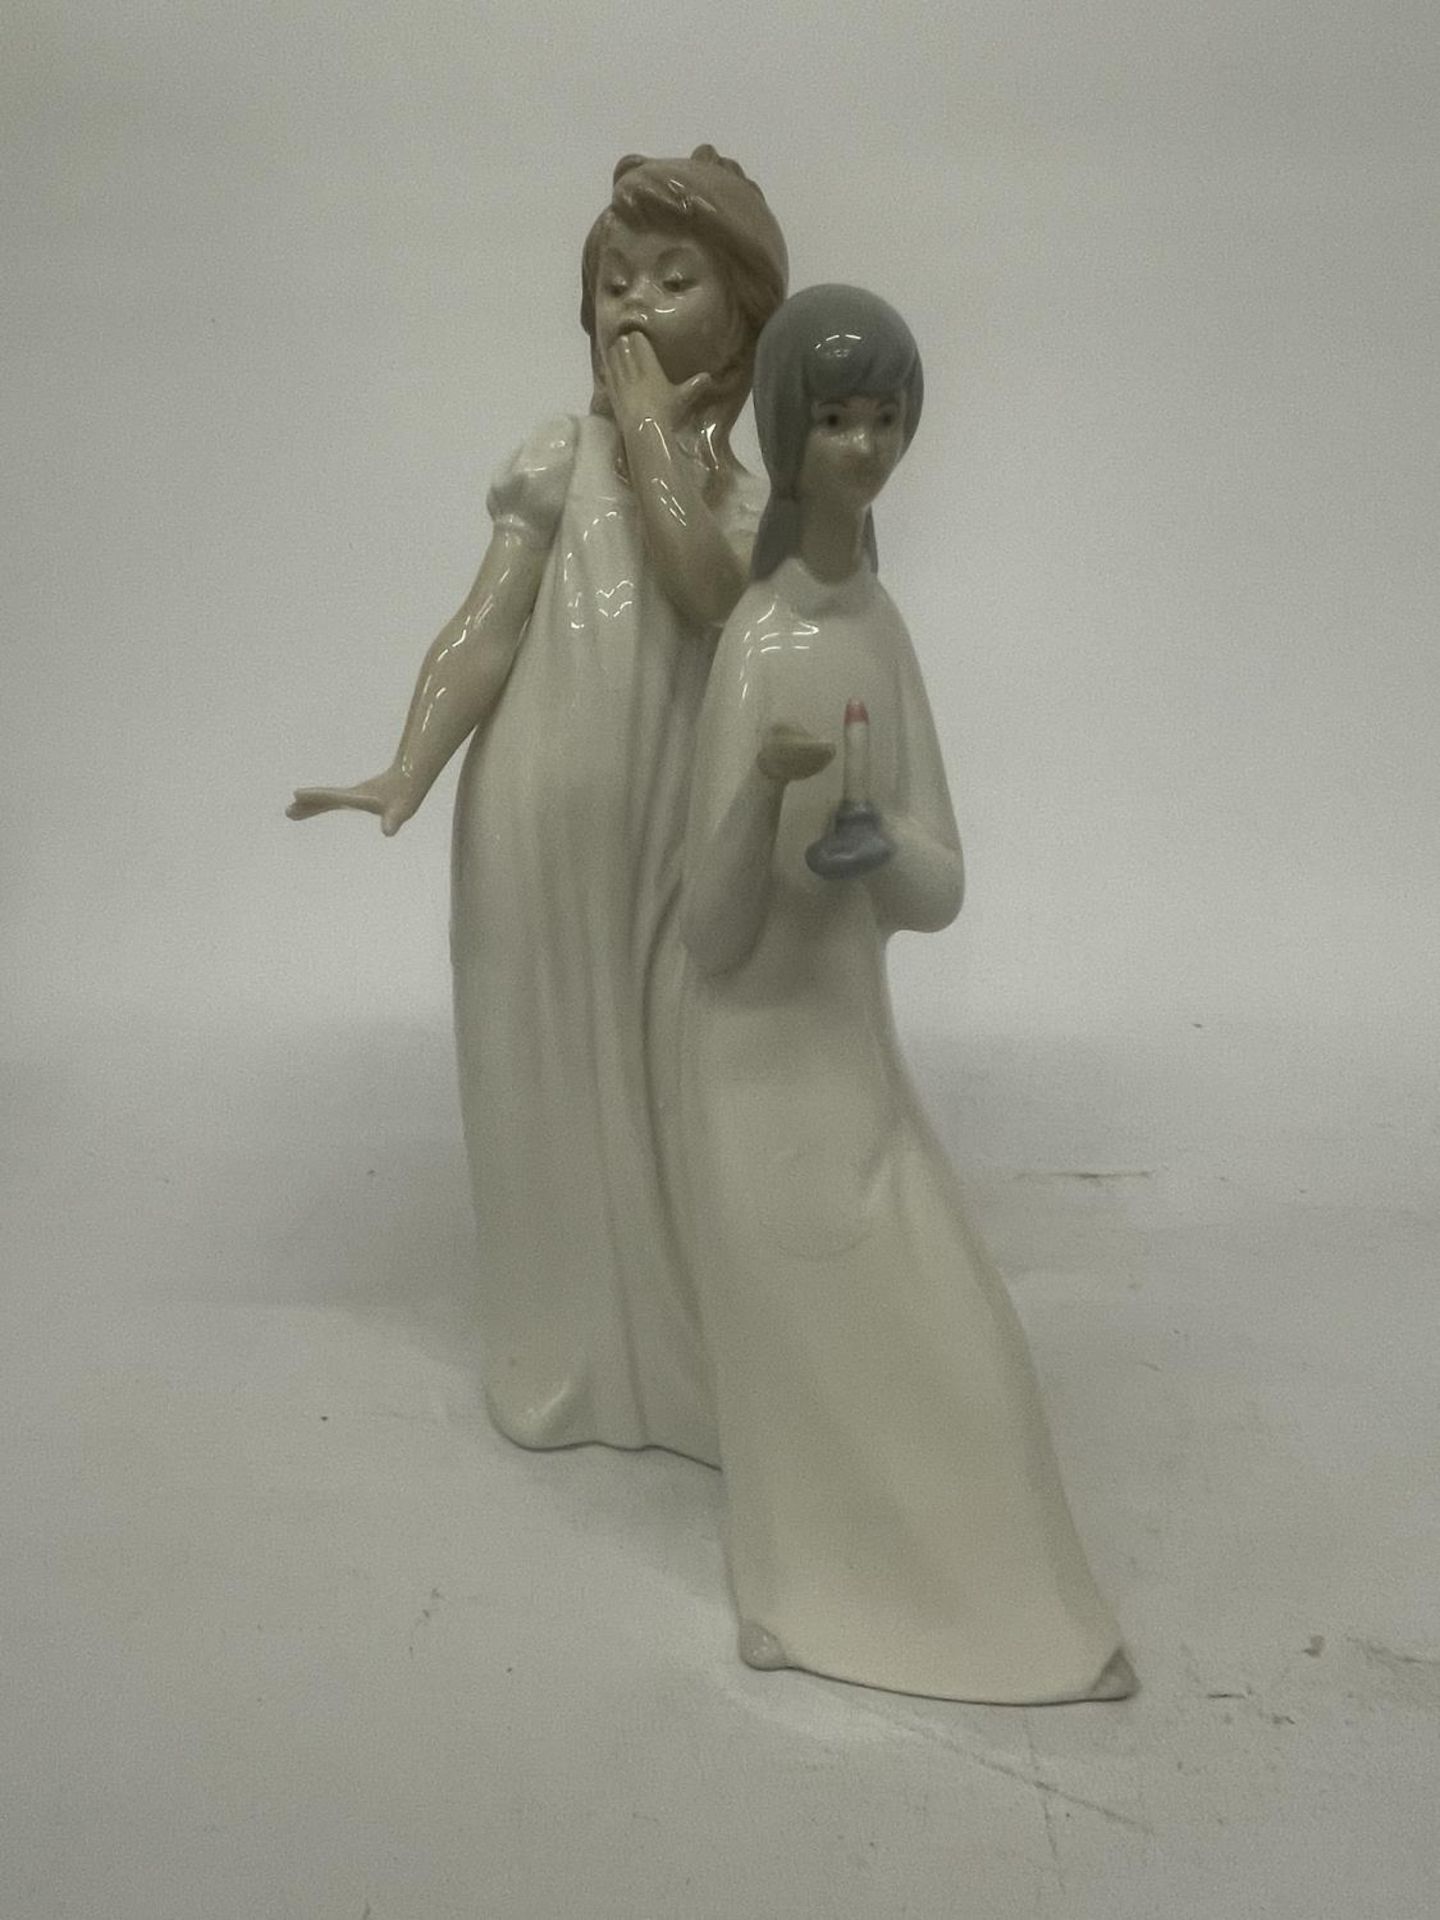 A NAO FIGURE OF A GIRL YAWNING TOGETHER WITH A MIQUEL REQUENA S.A. FIGURE OF A GIRL HOLDING A CANDLE